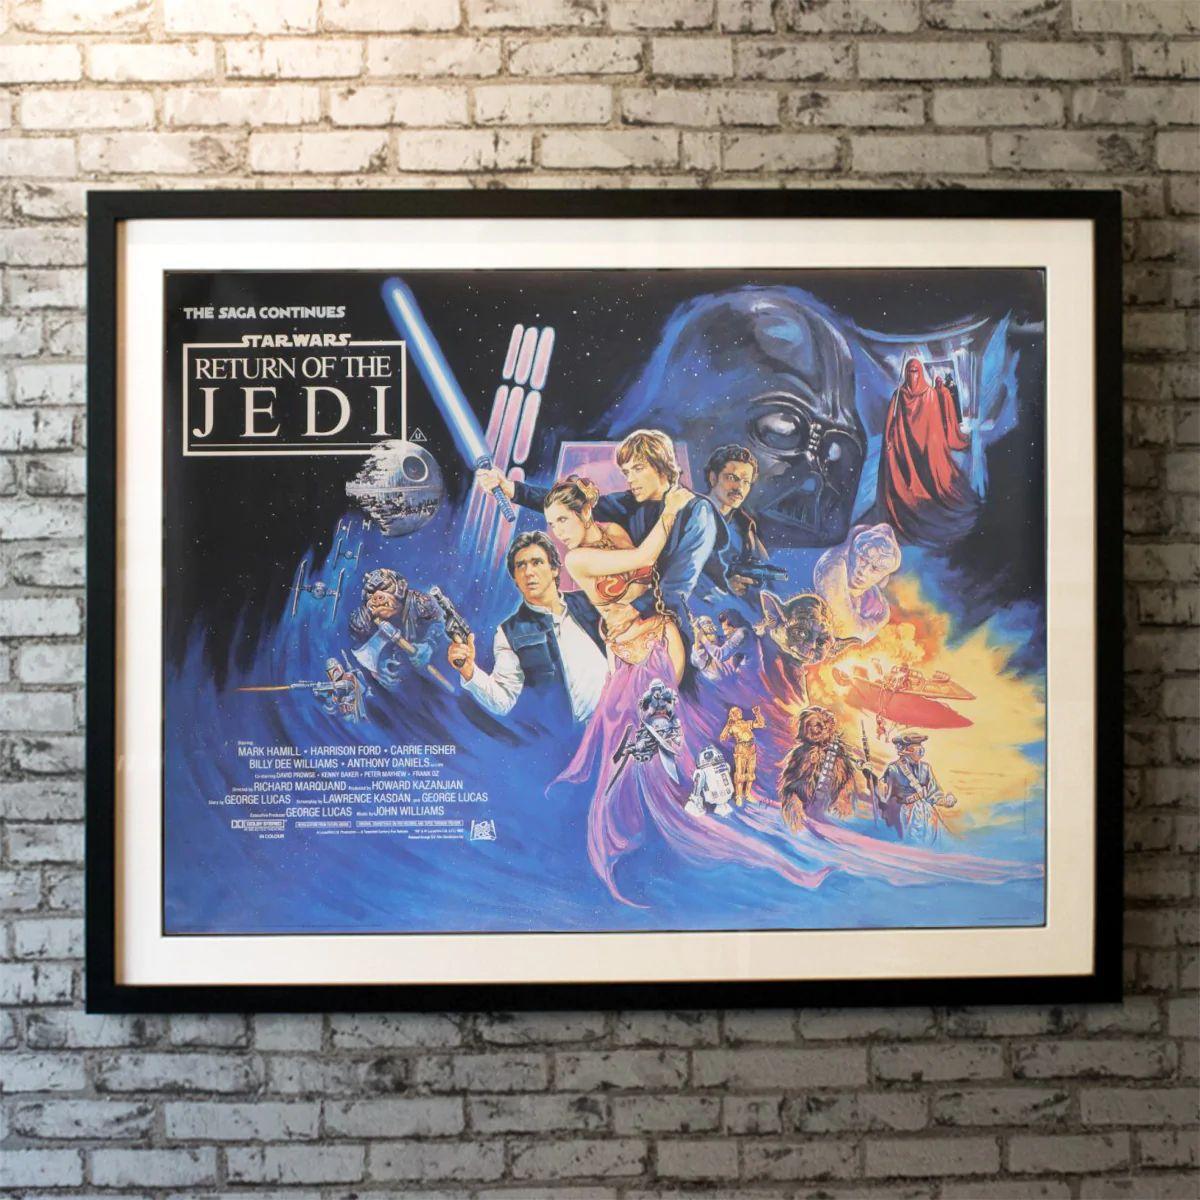 Return Of The Jedi, Unframed Poster, 1983

Luke Skywalker (Mark Hamill) battles horrible Jabba the Hut and cruel Darth Vader to save his comrades in the Rebel Alliance and triumph over the Galactic Empire. Han Solo (Harrison Ford) and Princess